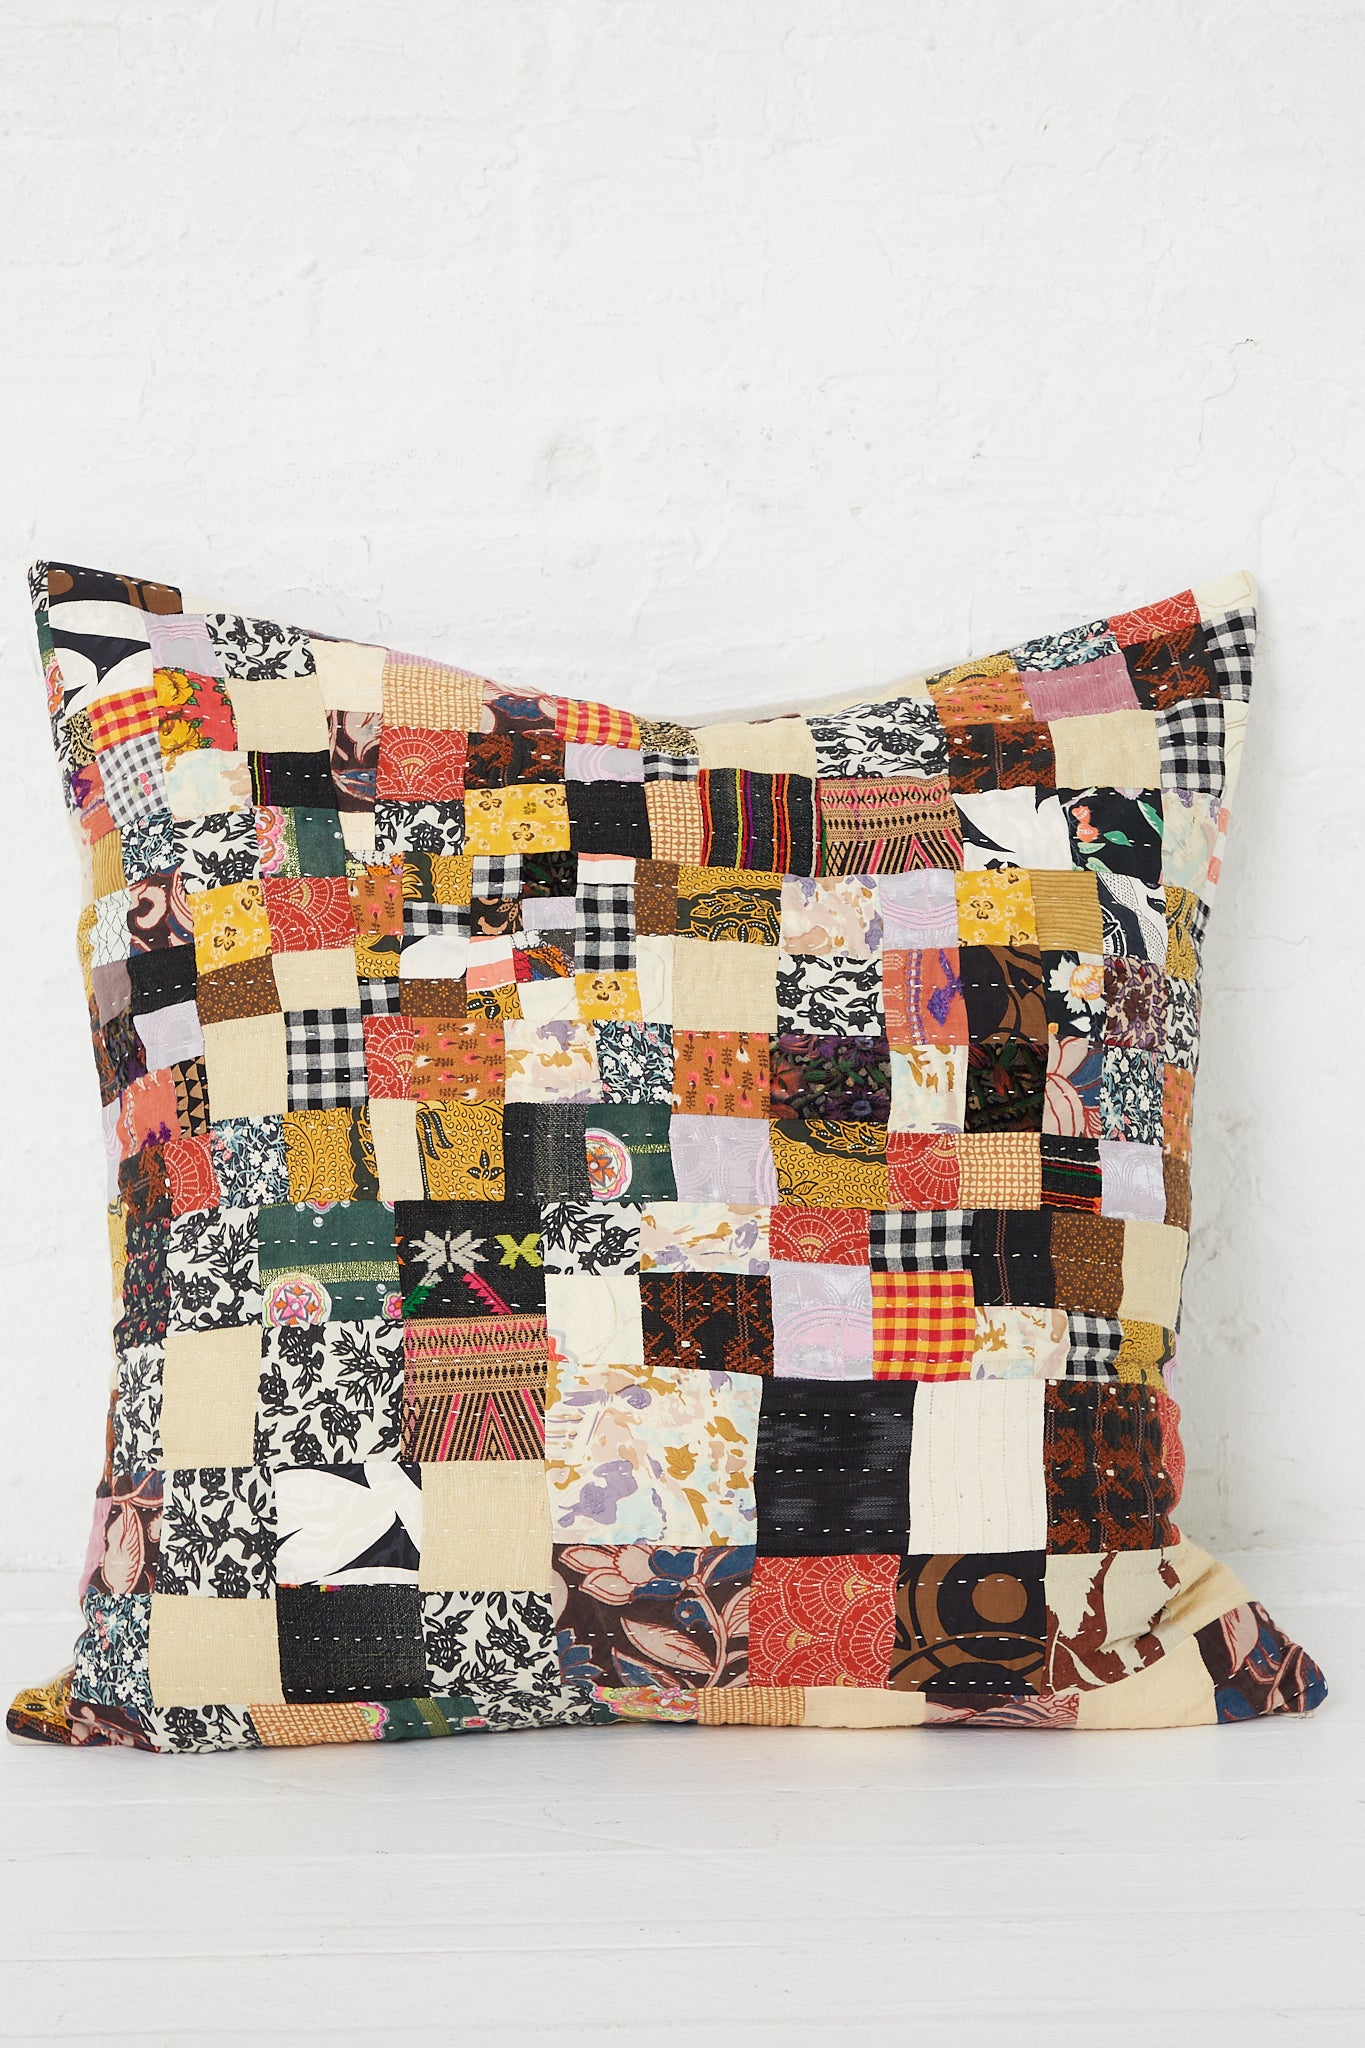 A Counterpane Patchwork Pillows in Brown Multi II, with antique found cloth and showcasing a freehand quilting style, placed on a white background.